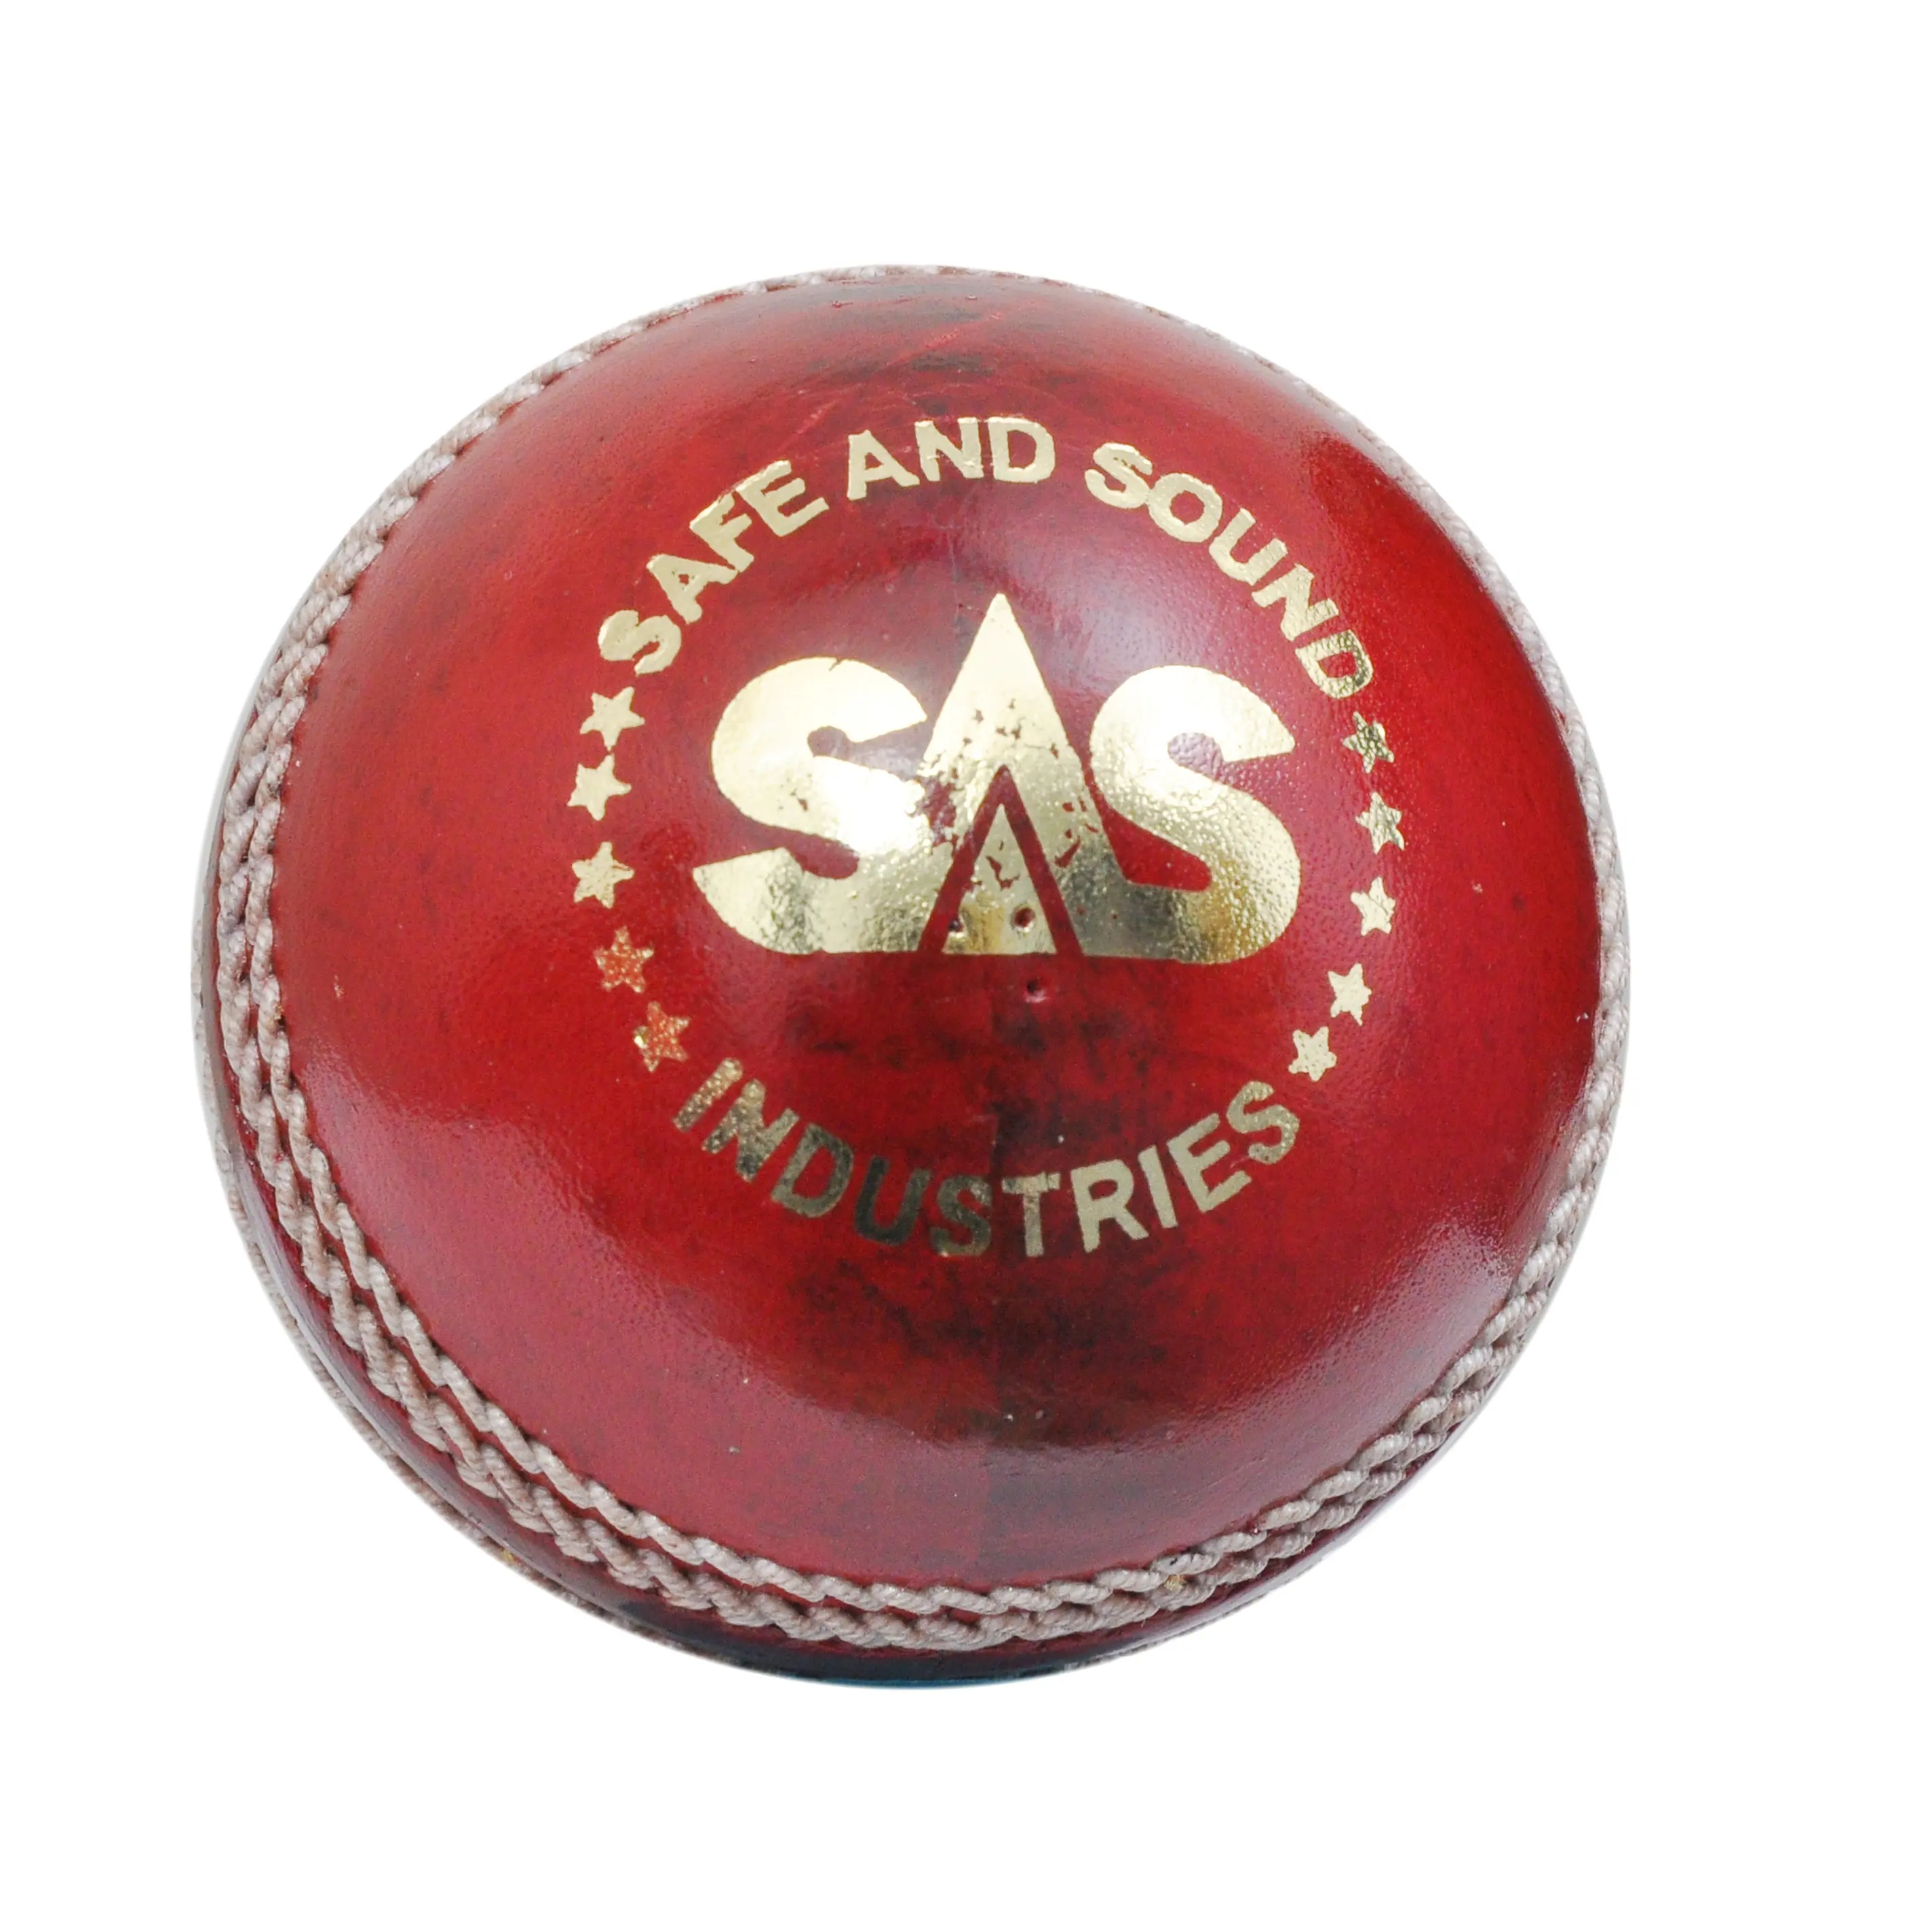 Details about   Indoor Pink Hard Cricket Balls  Indoor Cricket Practice and Training Pack of 2 